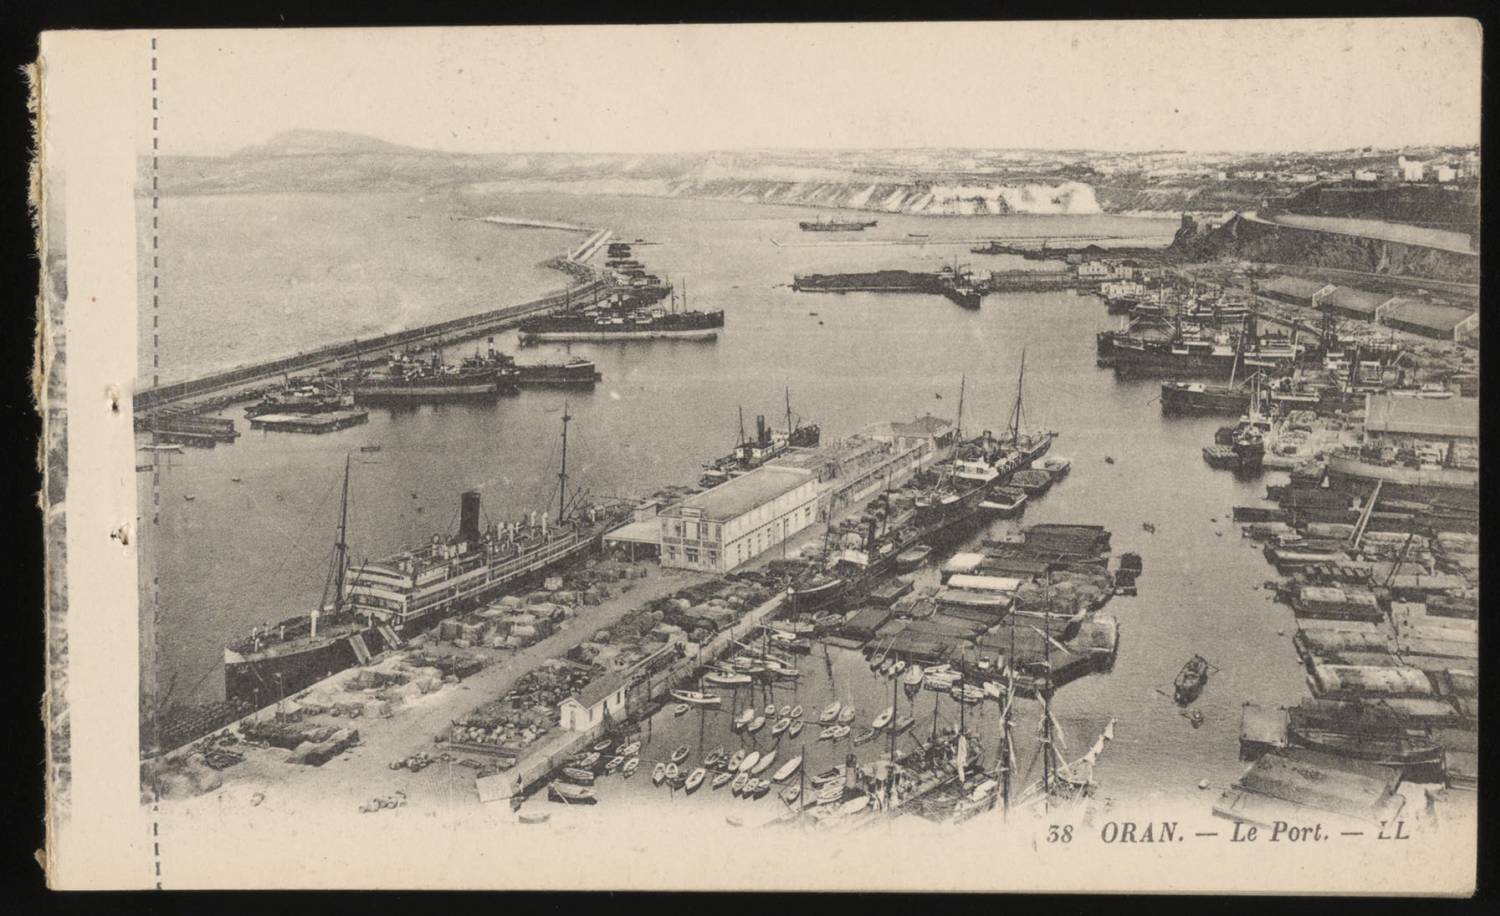 View of The Port in Oran